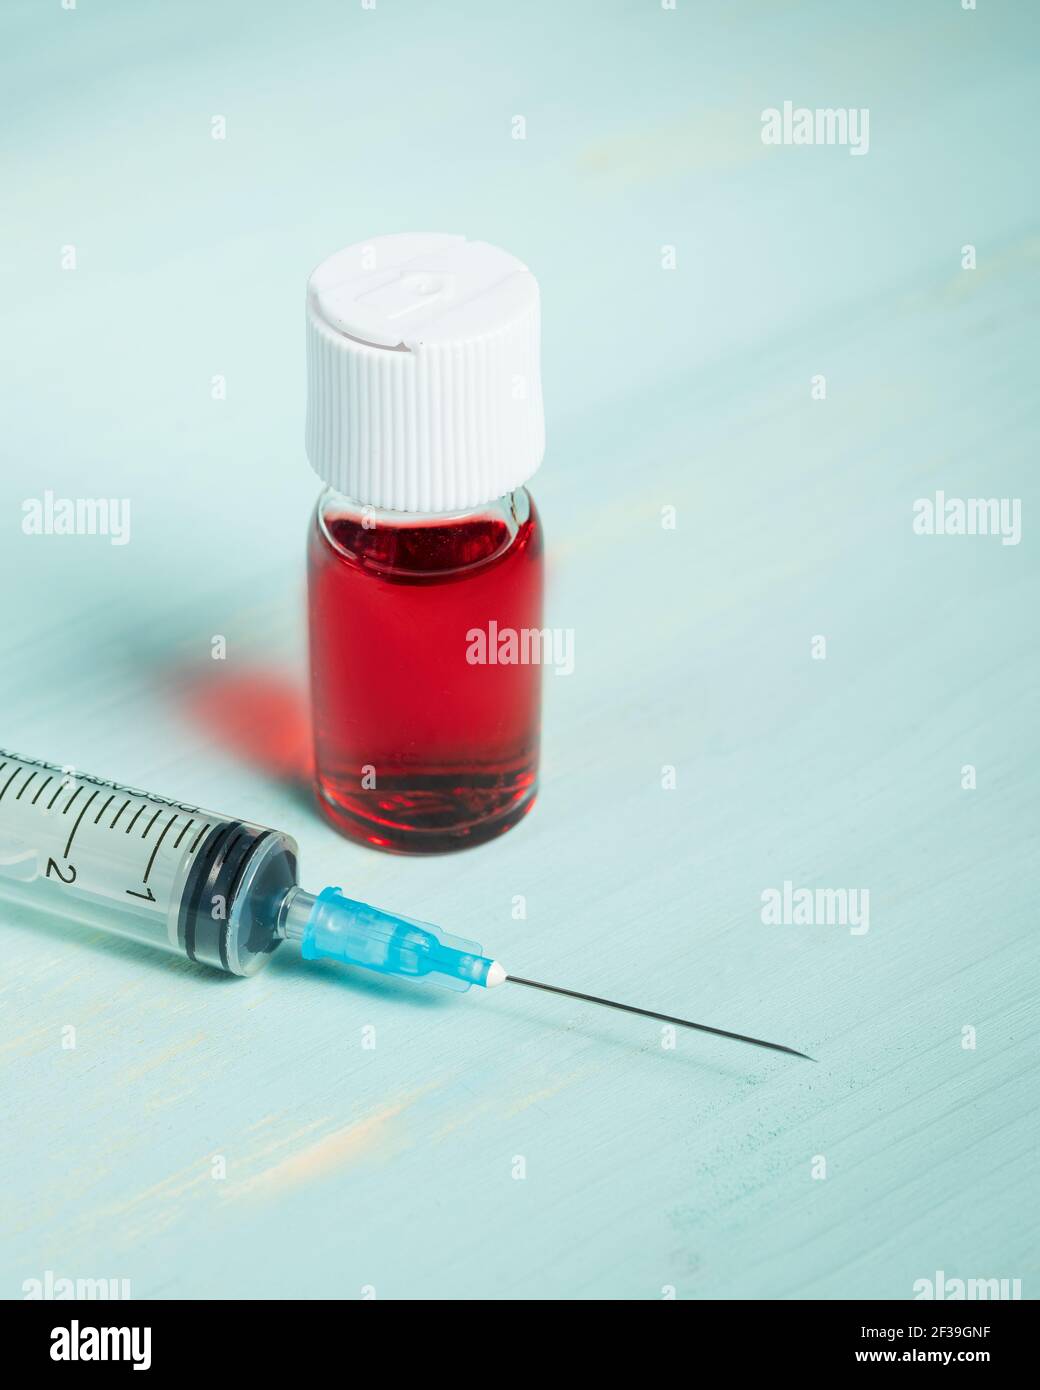 medical vaccine ampule with red liquid and syringe over green table and white background. Vaccination and immunization conceptual. Stock Photo